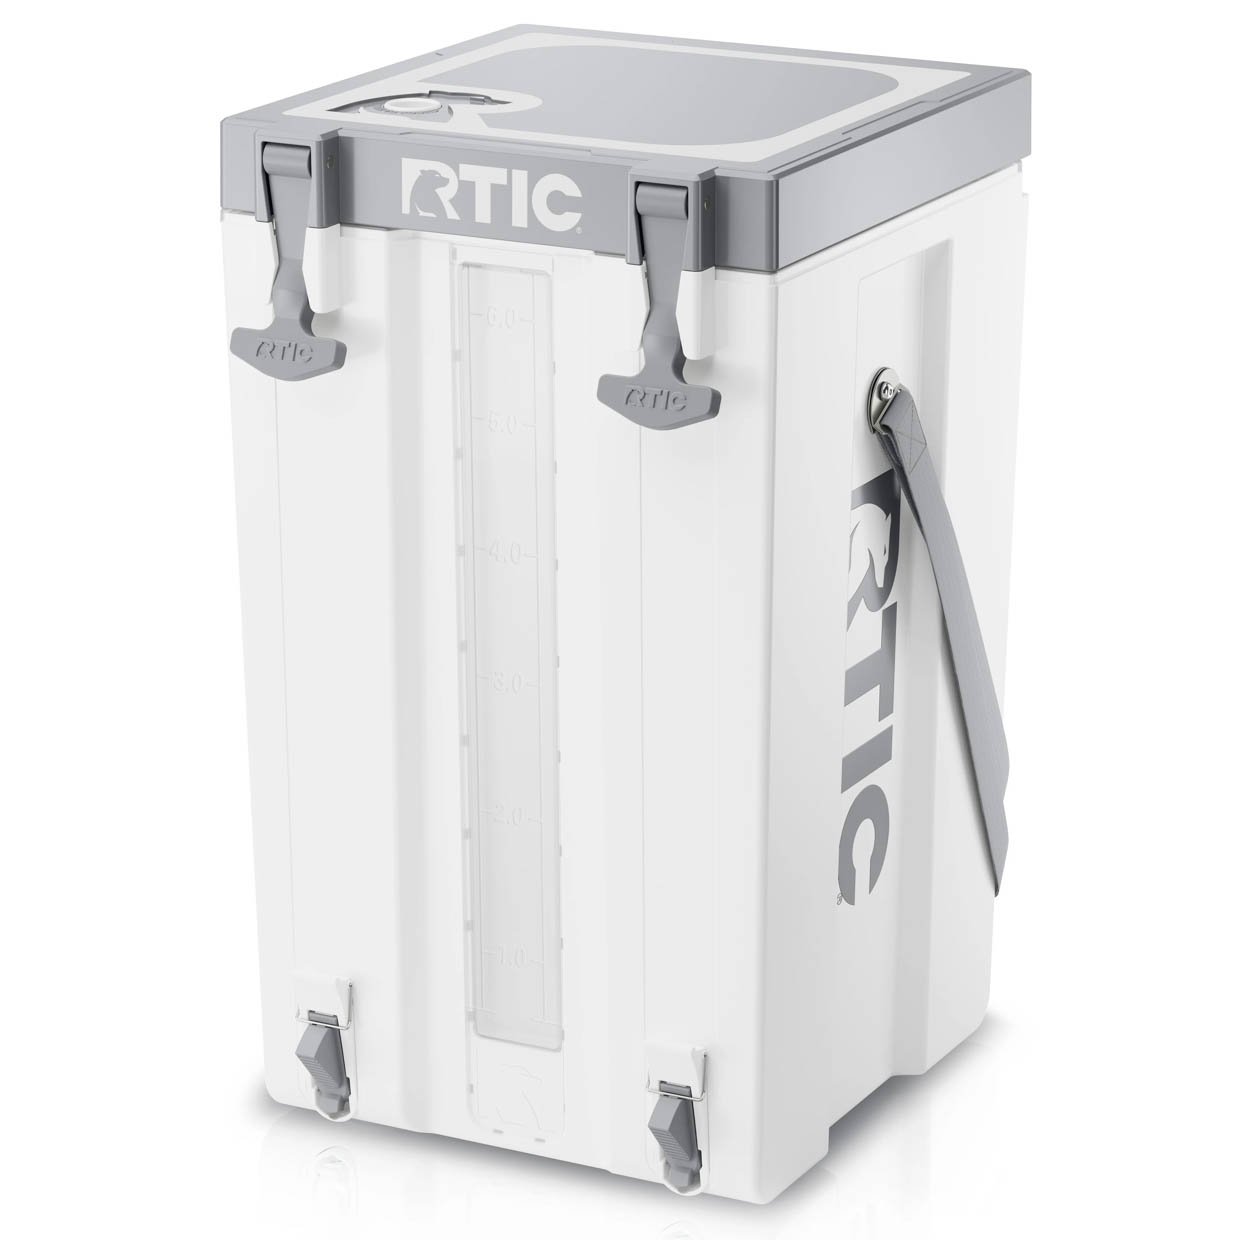 RTIC Halftime Water Coolers